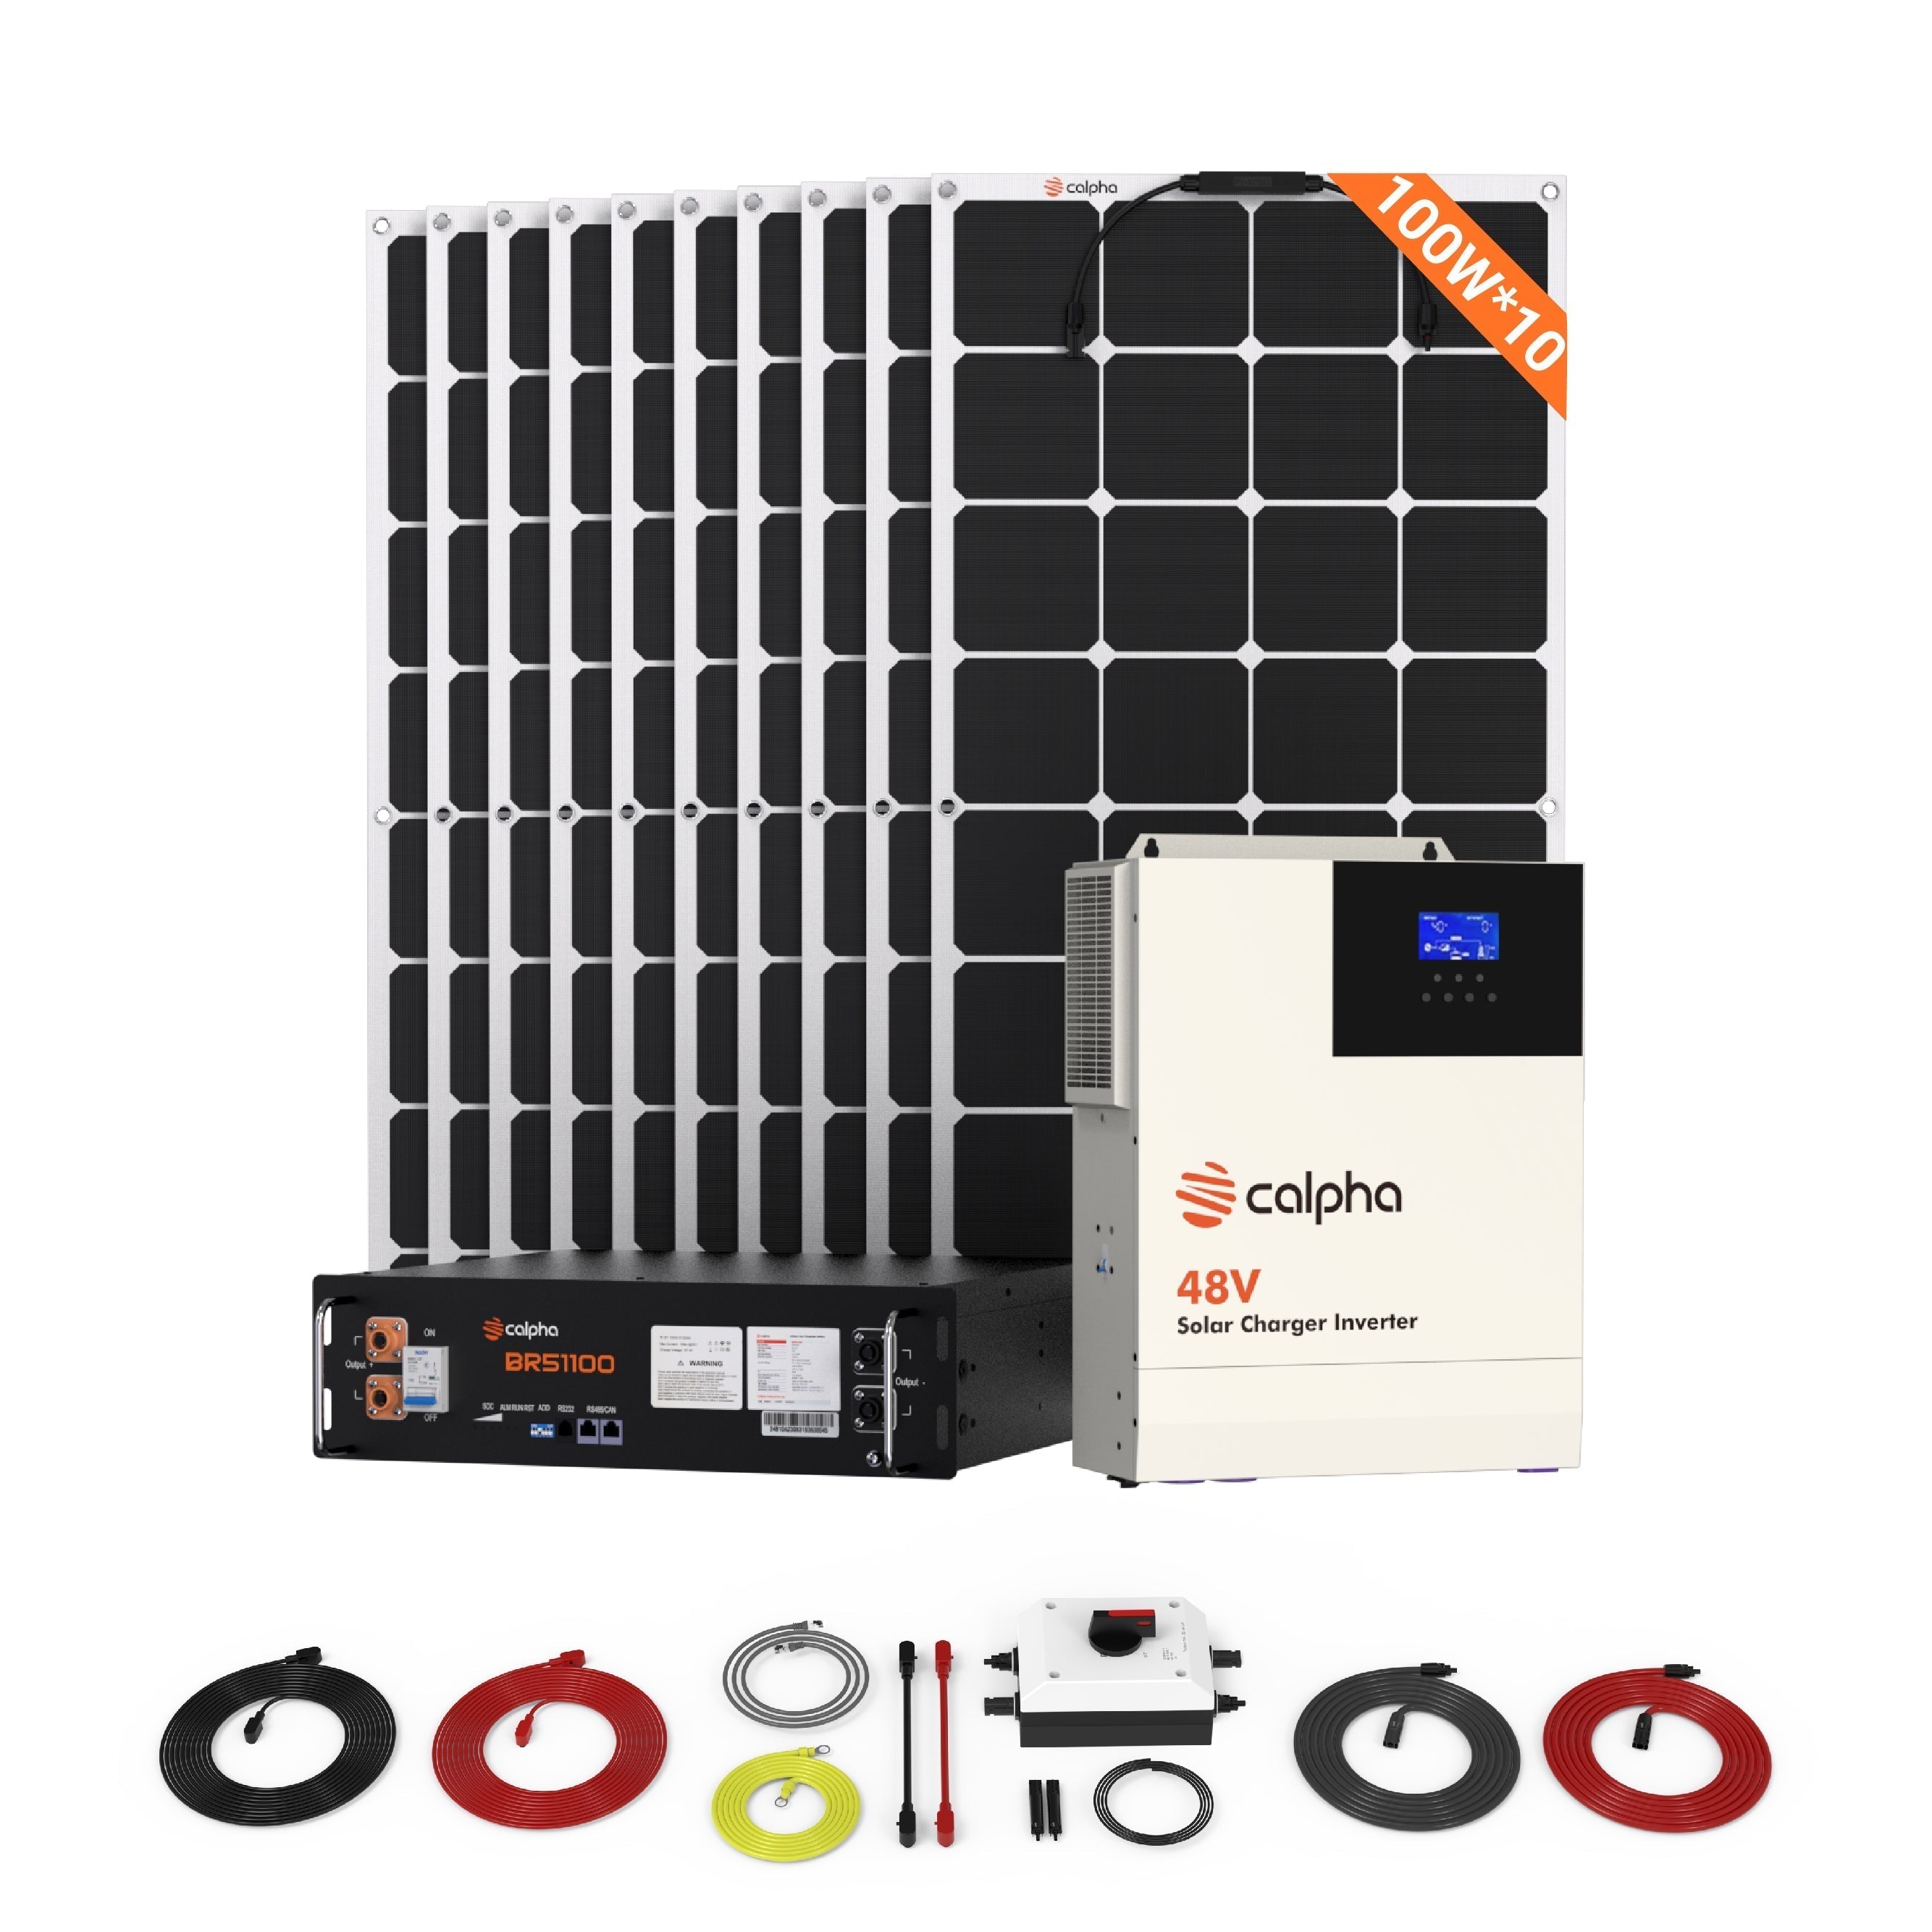 Calpha 1kW 5.12kWh Solar Panel Flexible Kits (5kW Inverter) for Home